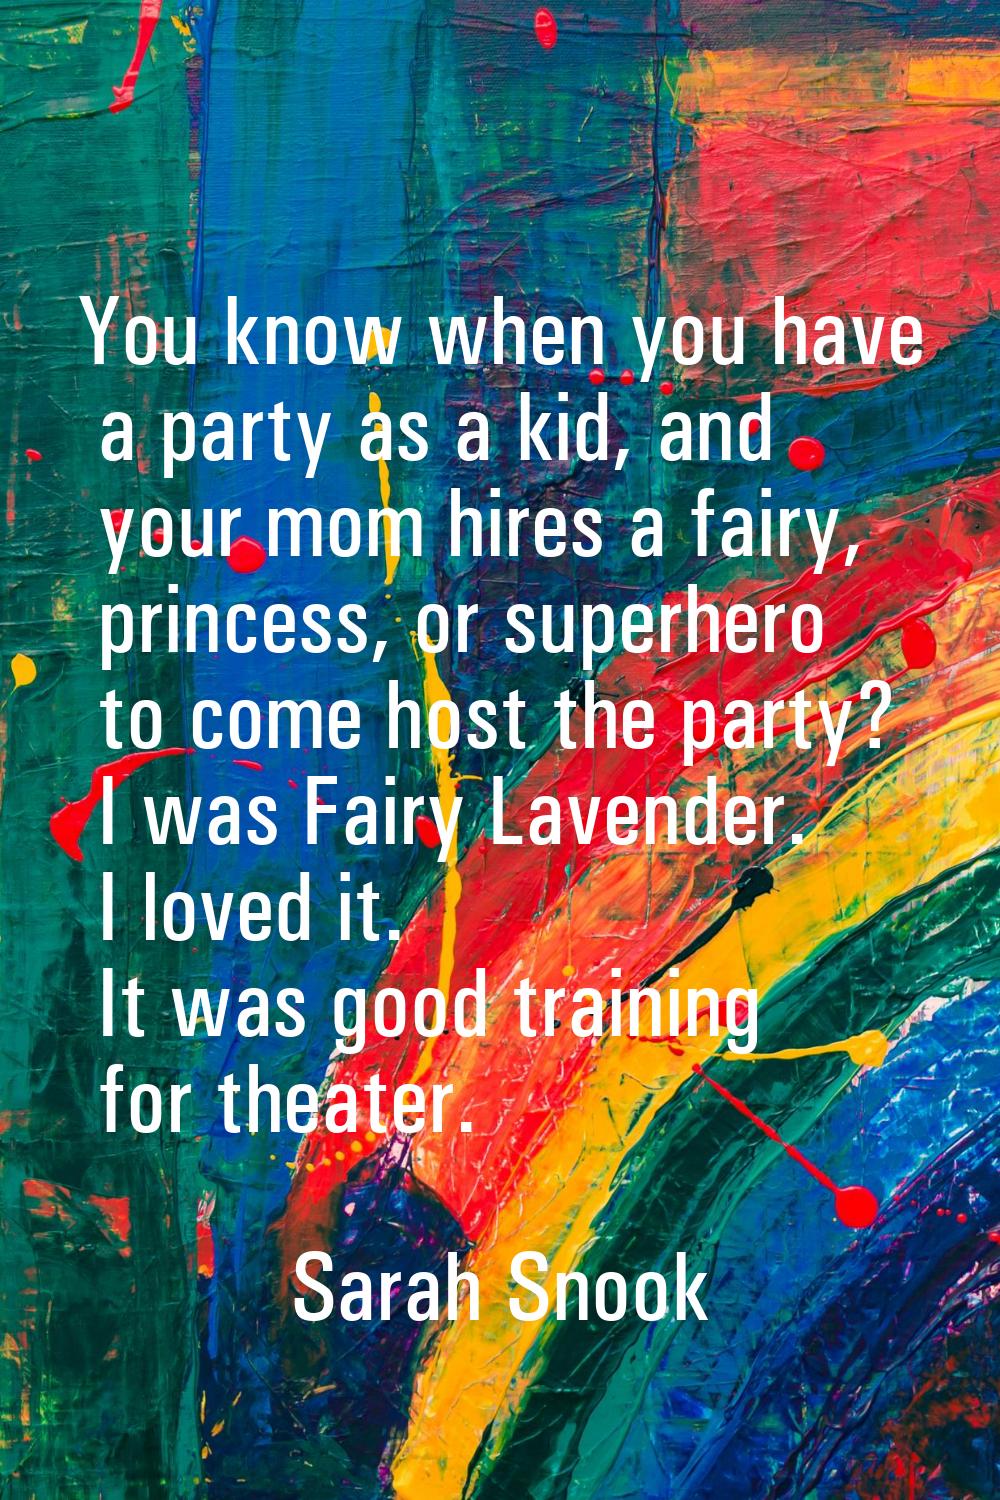 You know when you have a party as a kid, and your mom hires a fairy, princess, or superhero to come